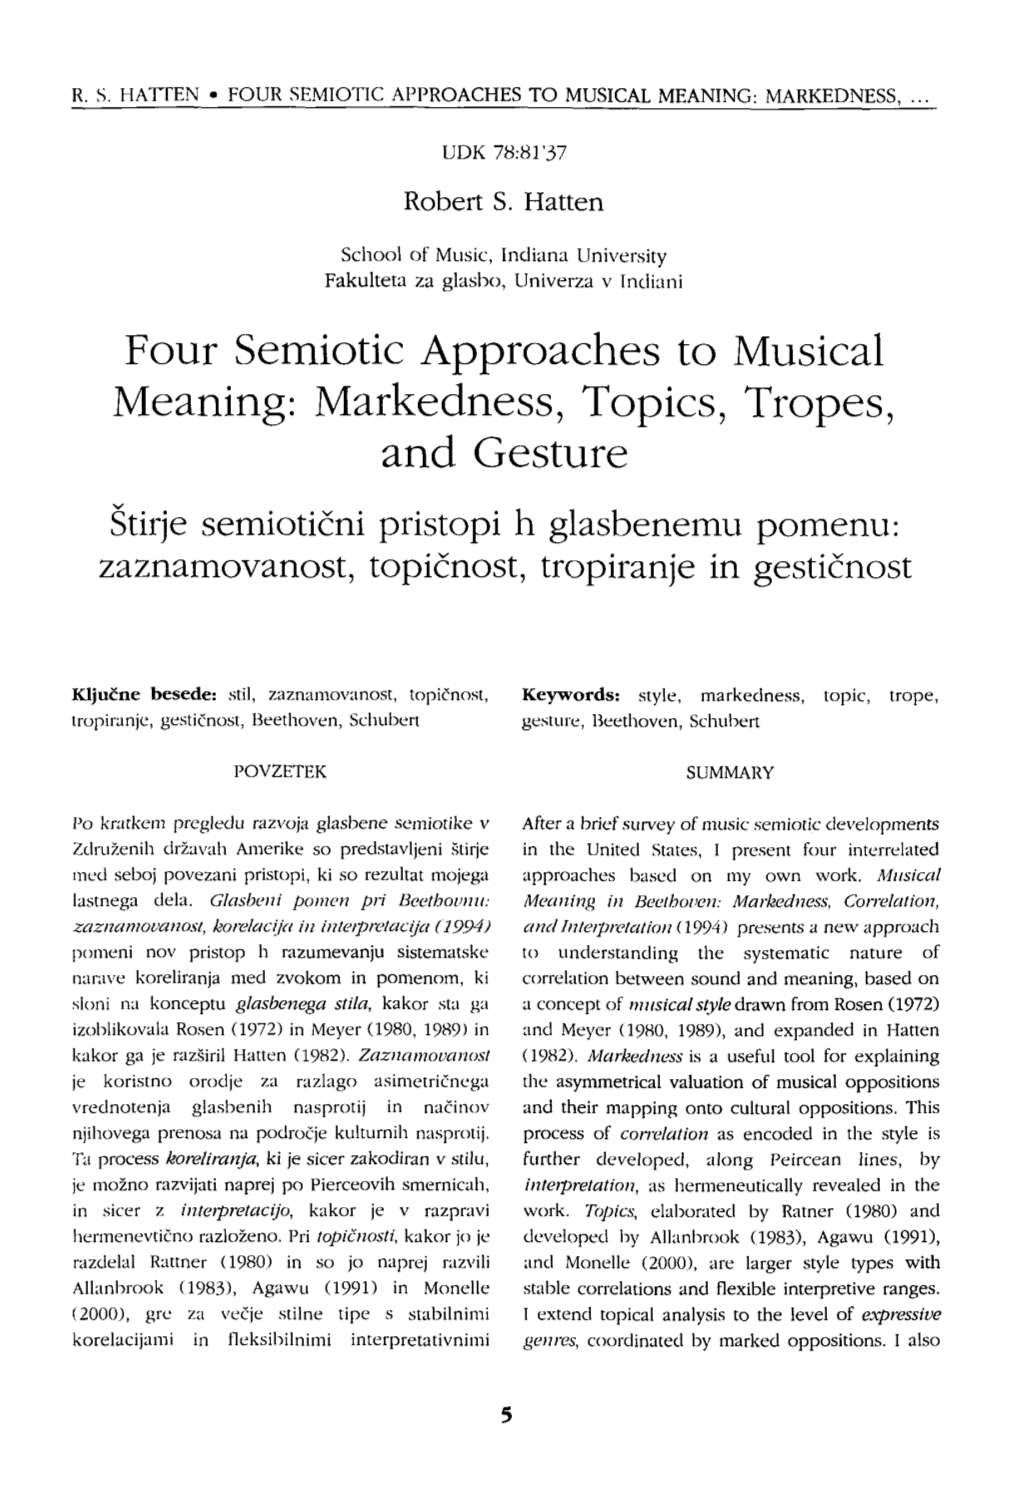 Four Semiotic Approaches to Musical Meaning: Markedness,